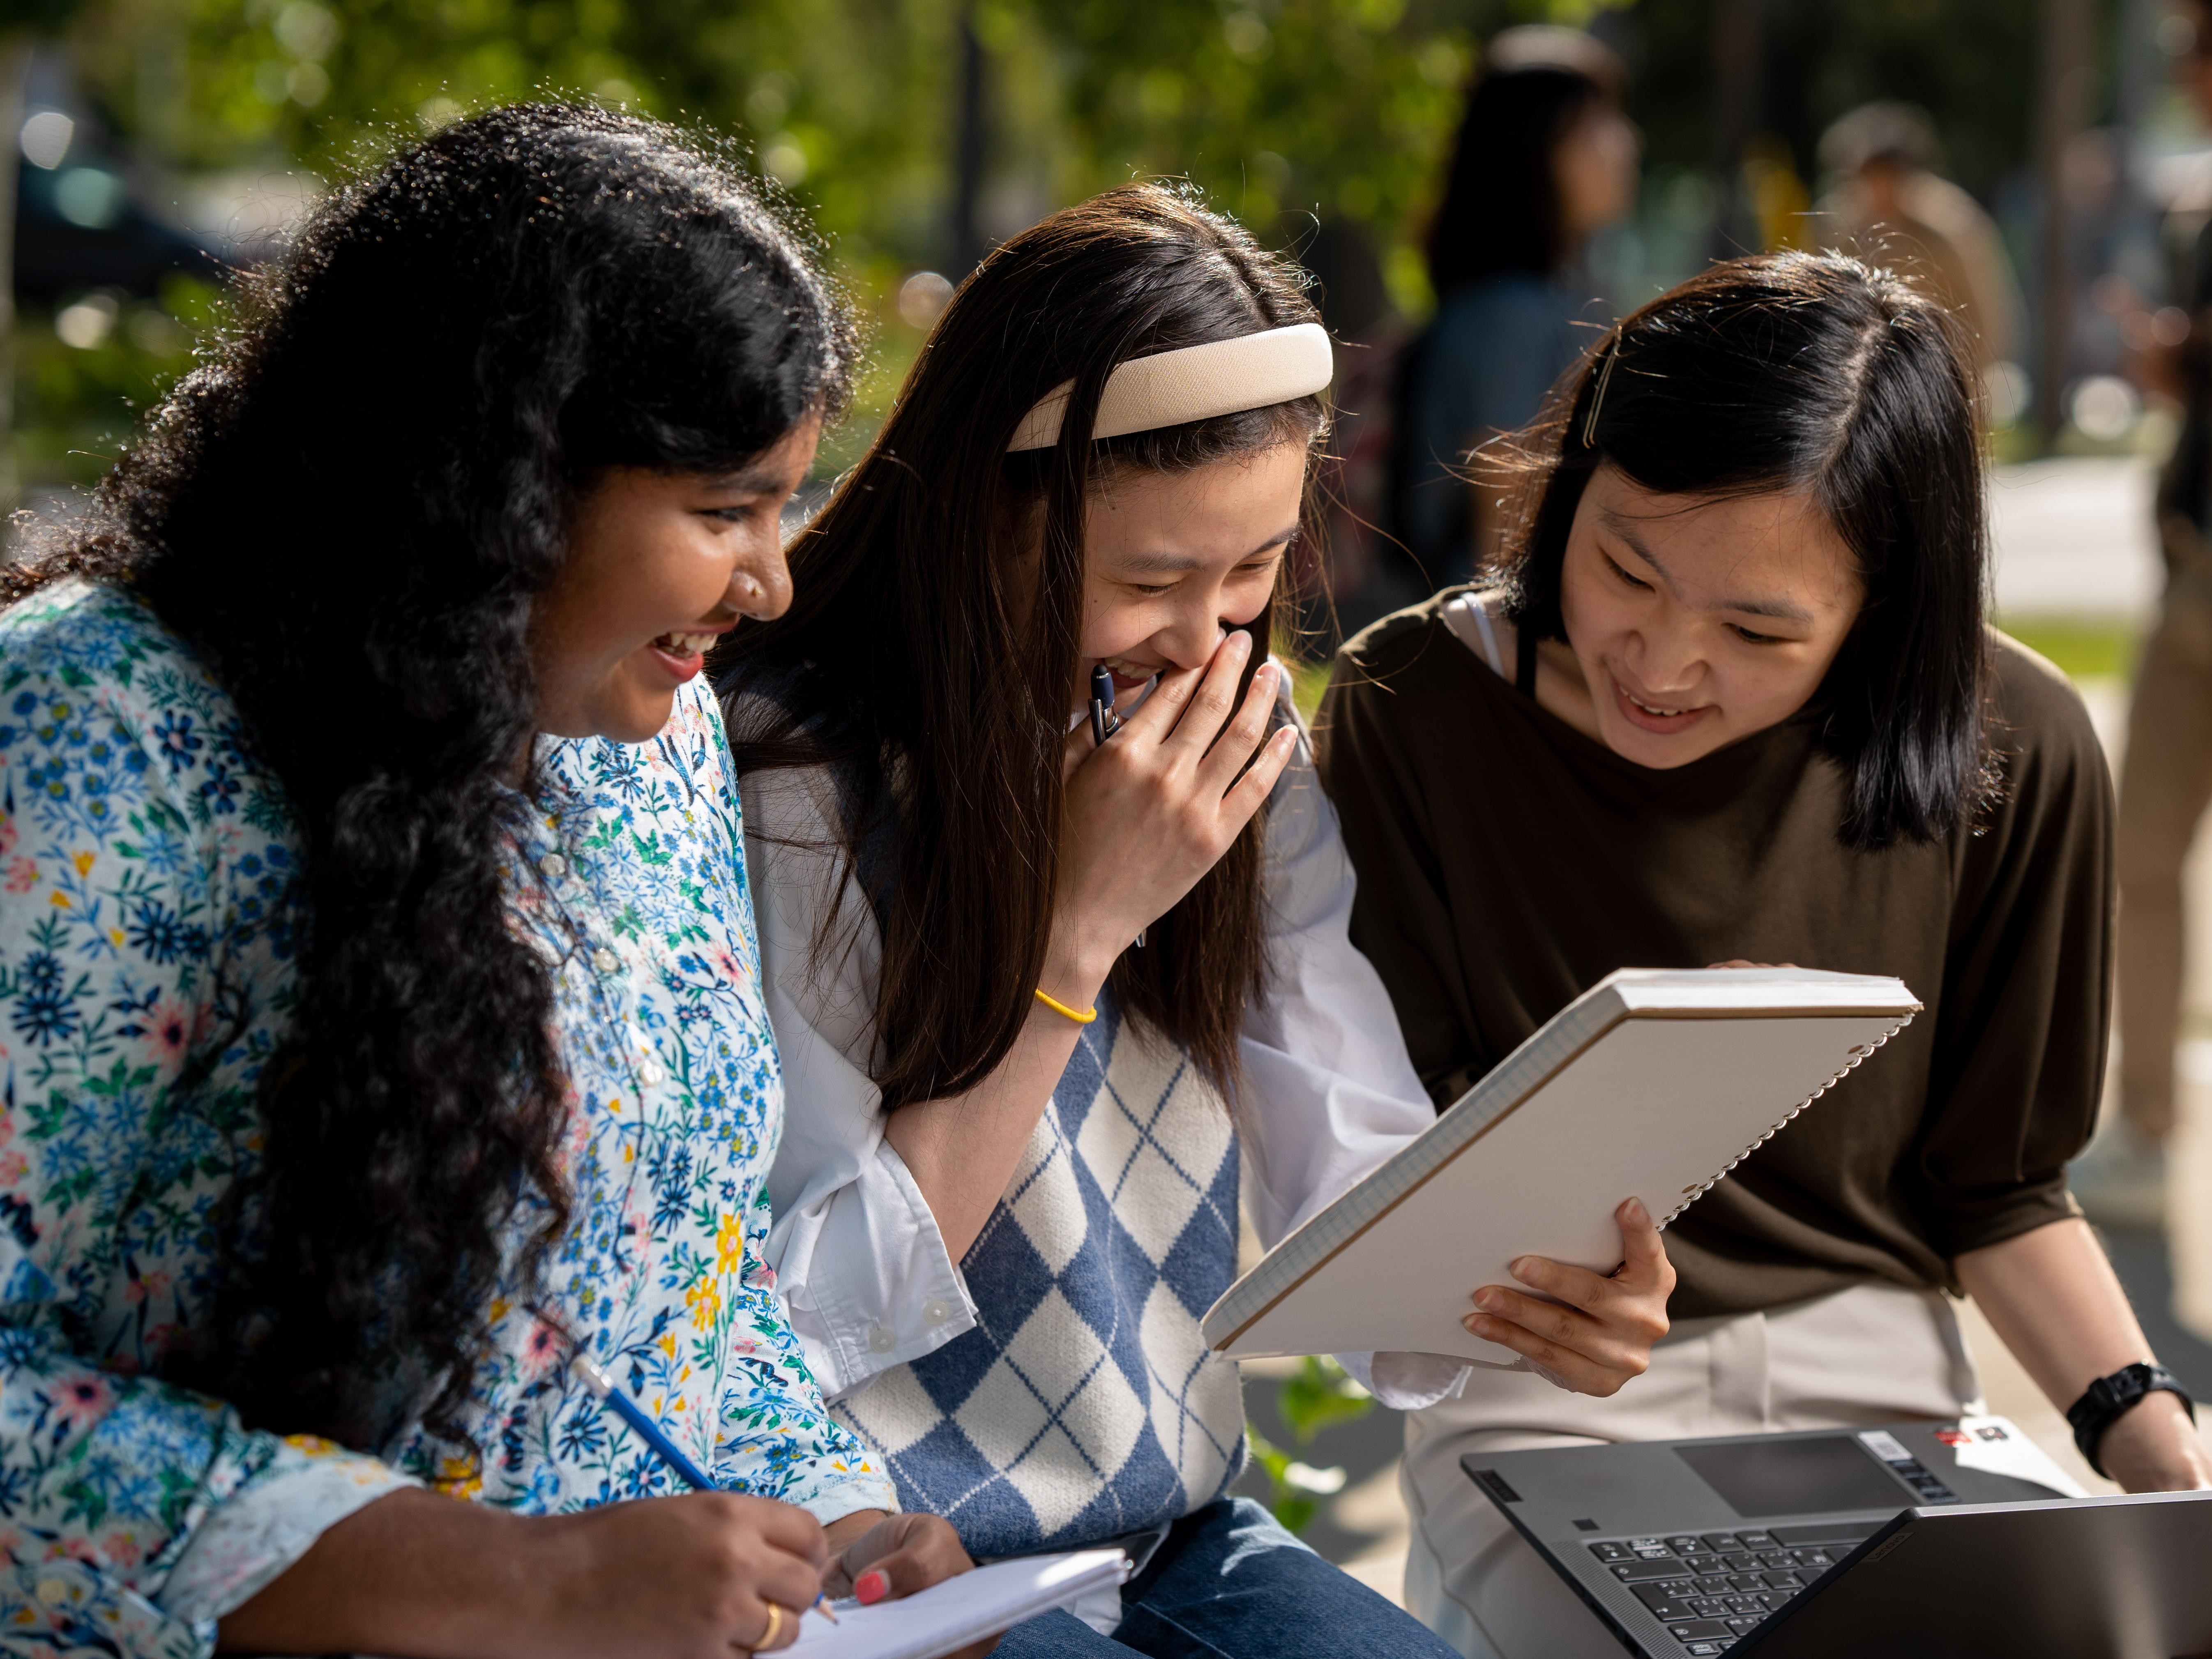 Students laughing over a notebook